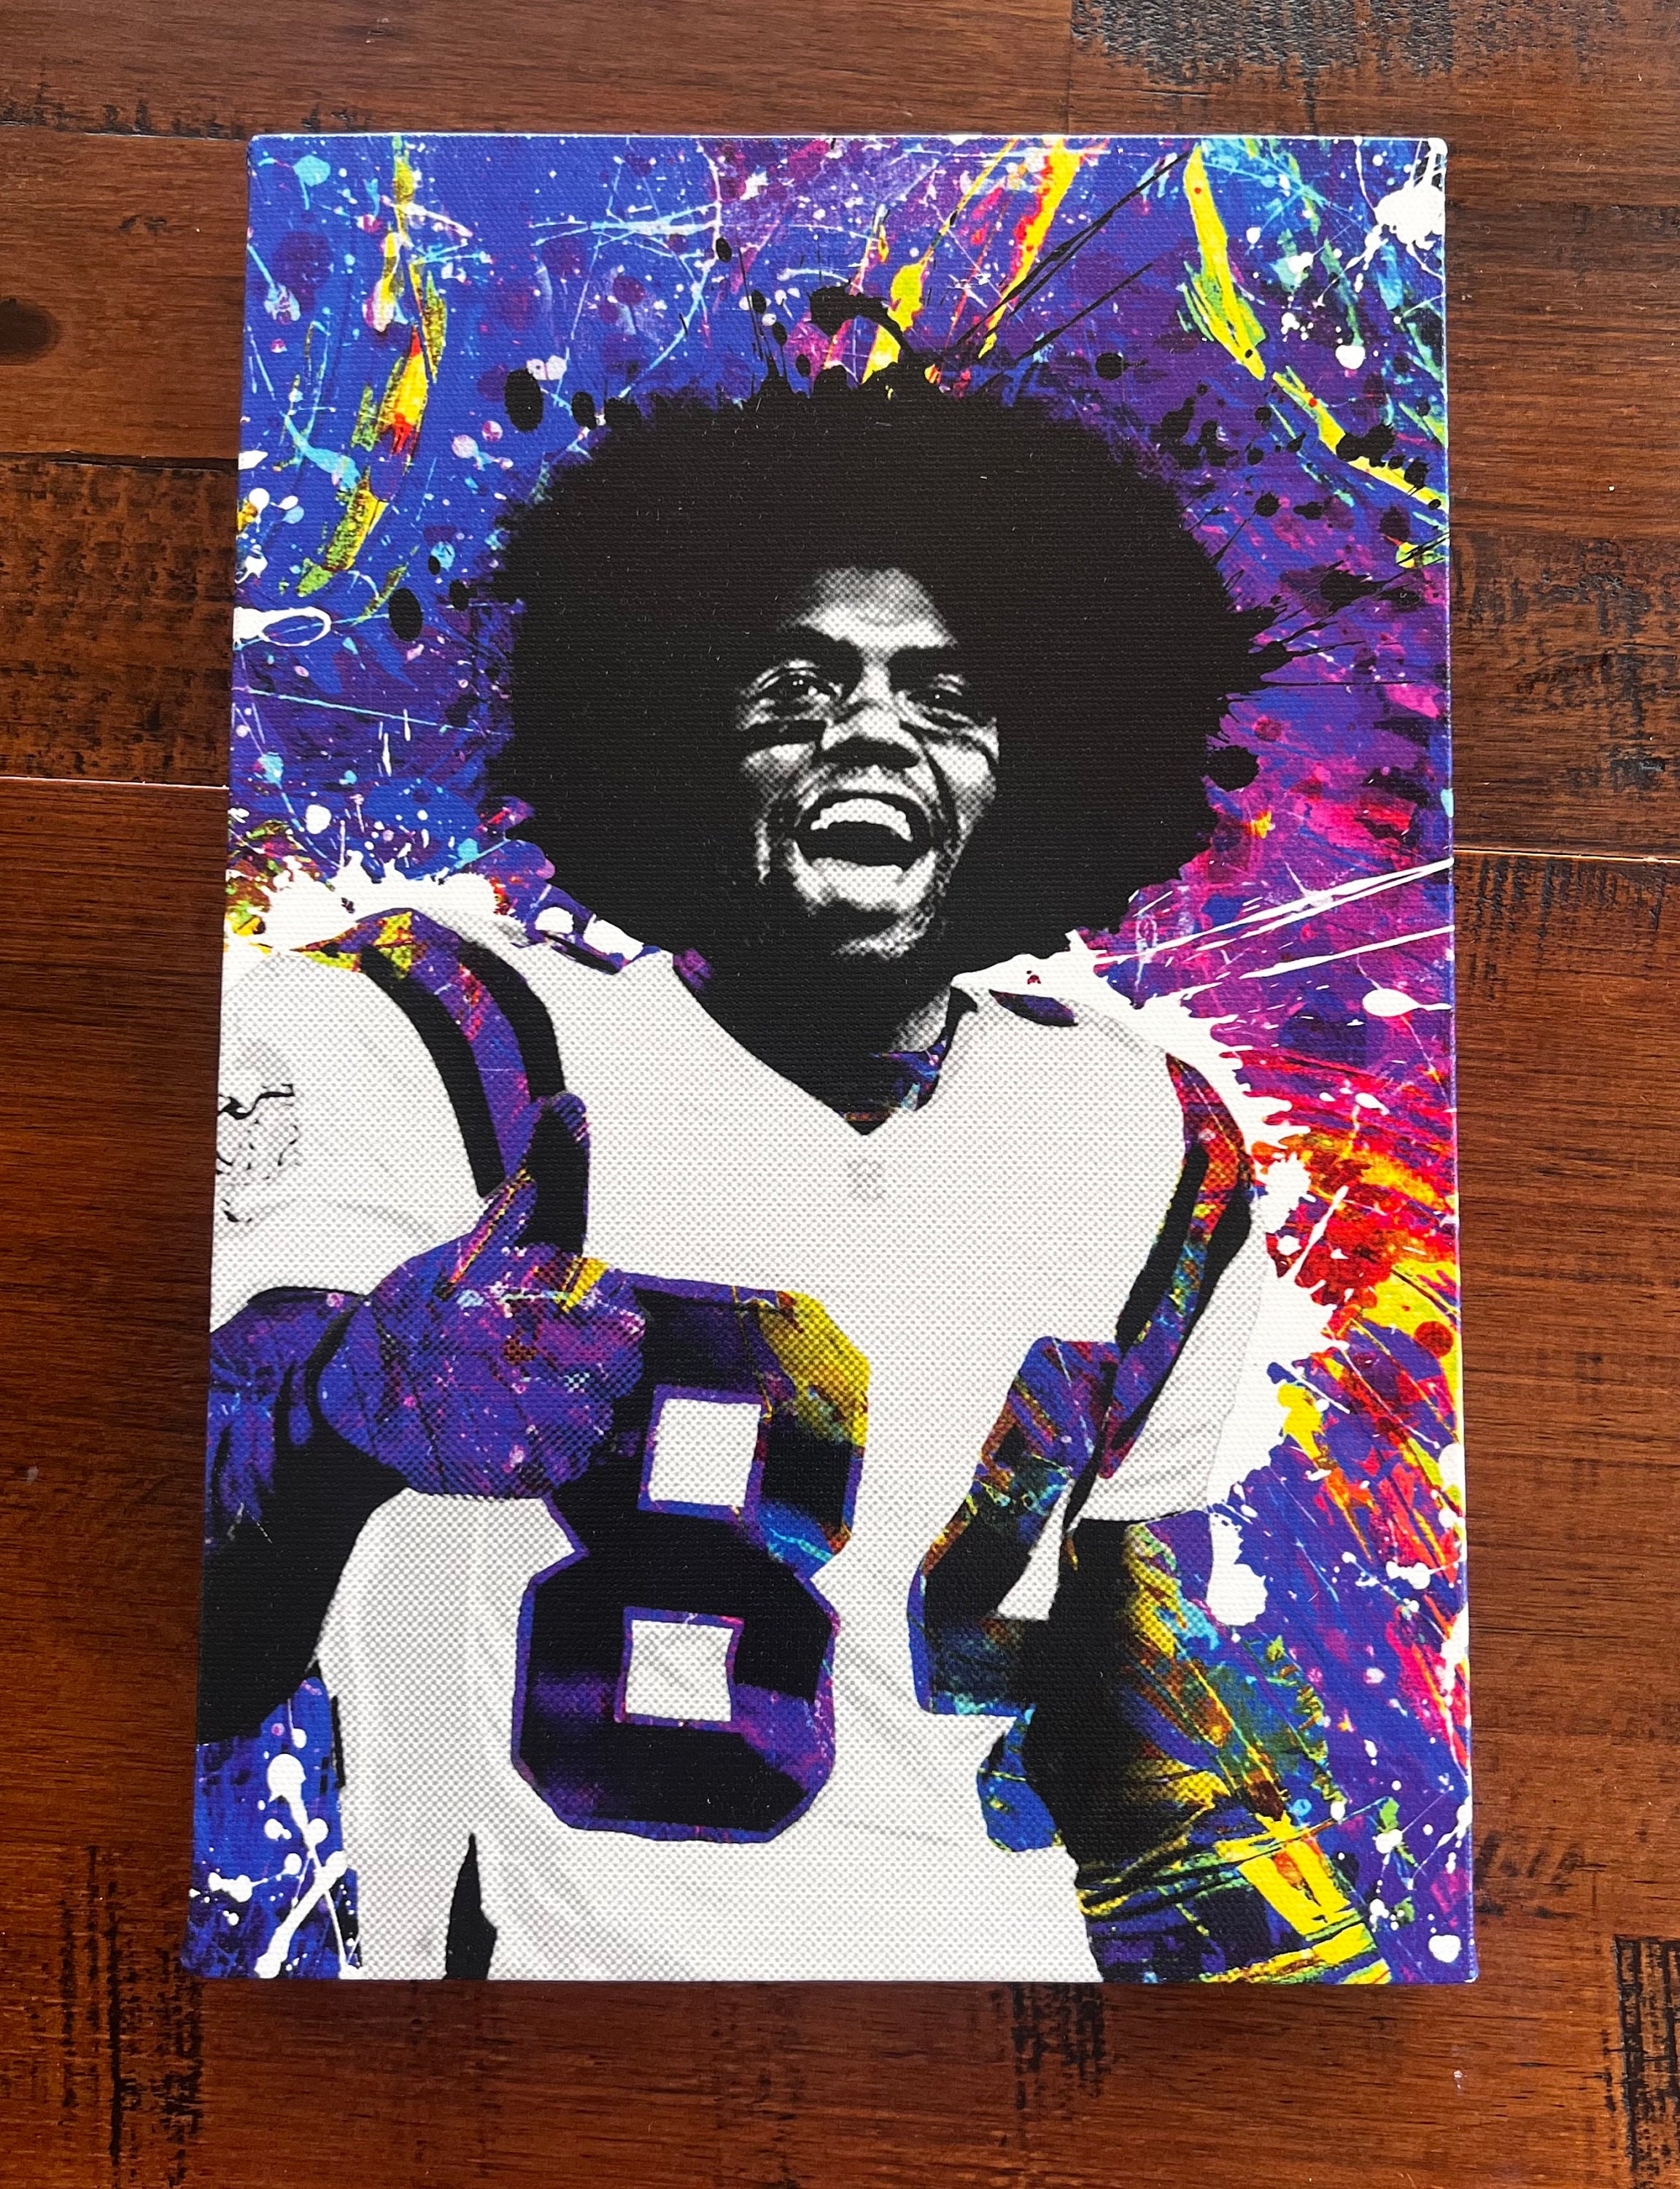  Guyos Sportsmen Randy Moss Art Poster Poster Album Art Decor  Painting Wall Art Canvas Poster Bedroom Decor Poster 16x24inch(40x60cm)  Frame-style: Posters & Prints